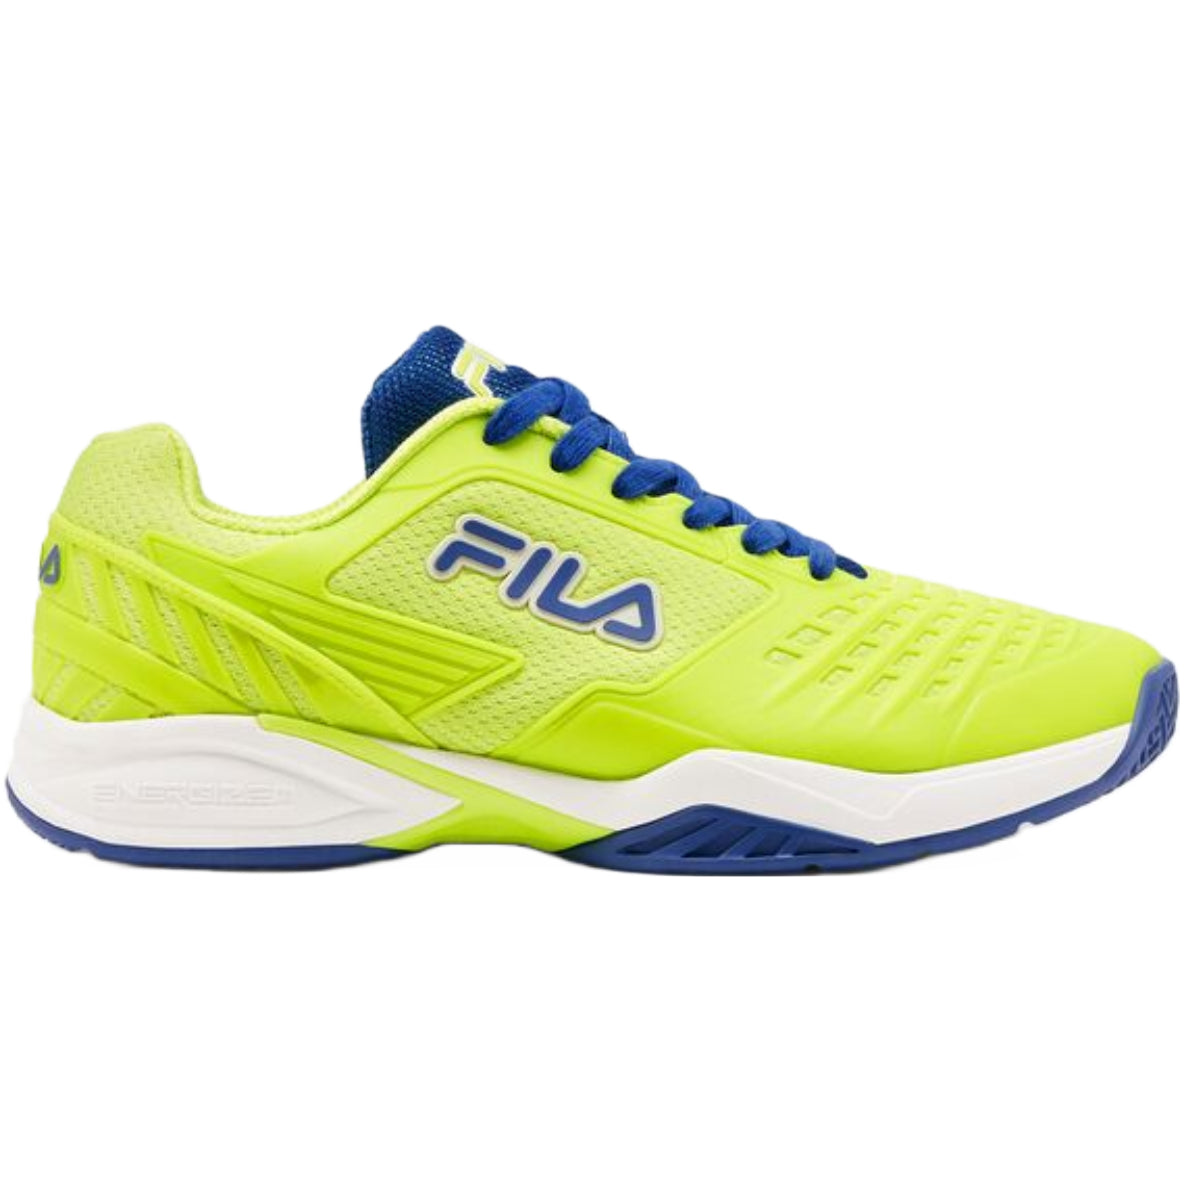 Men's Axilus Energized Tennis Shoes – All About Tennis